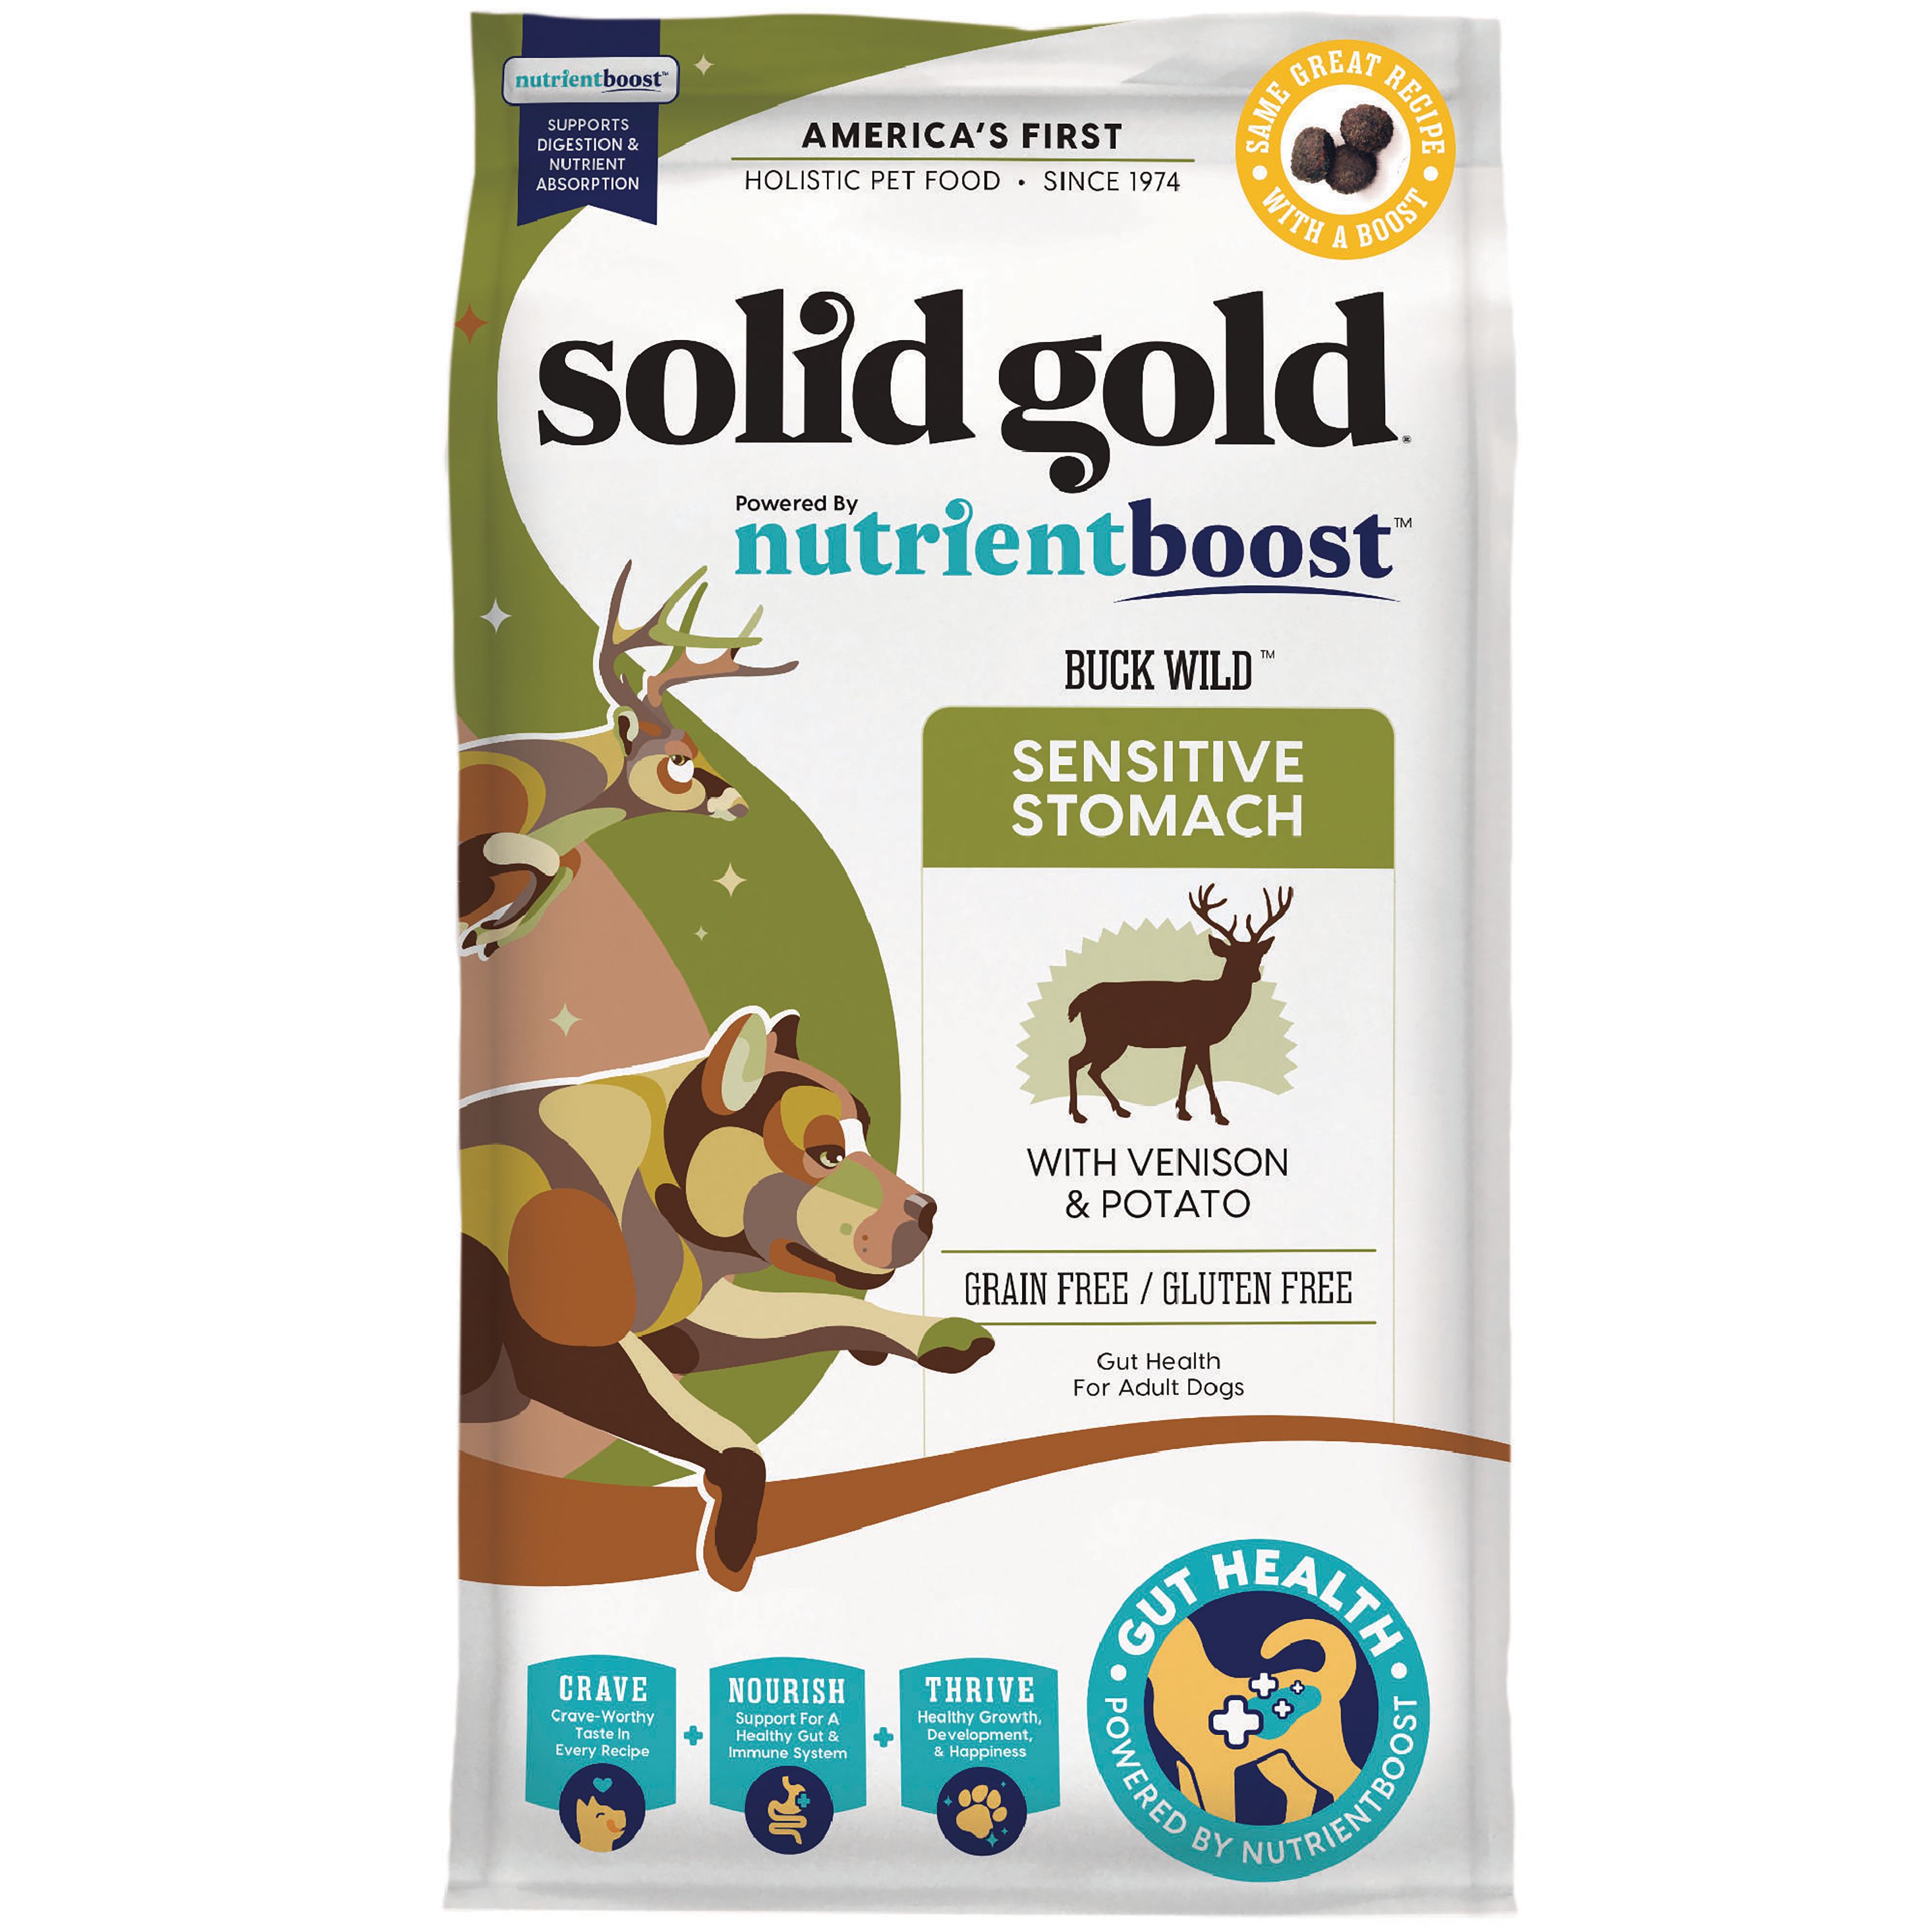 Solid Gold Pet-Fall 2017 New Products